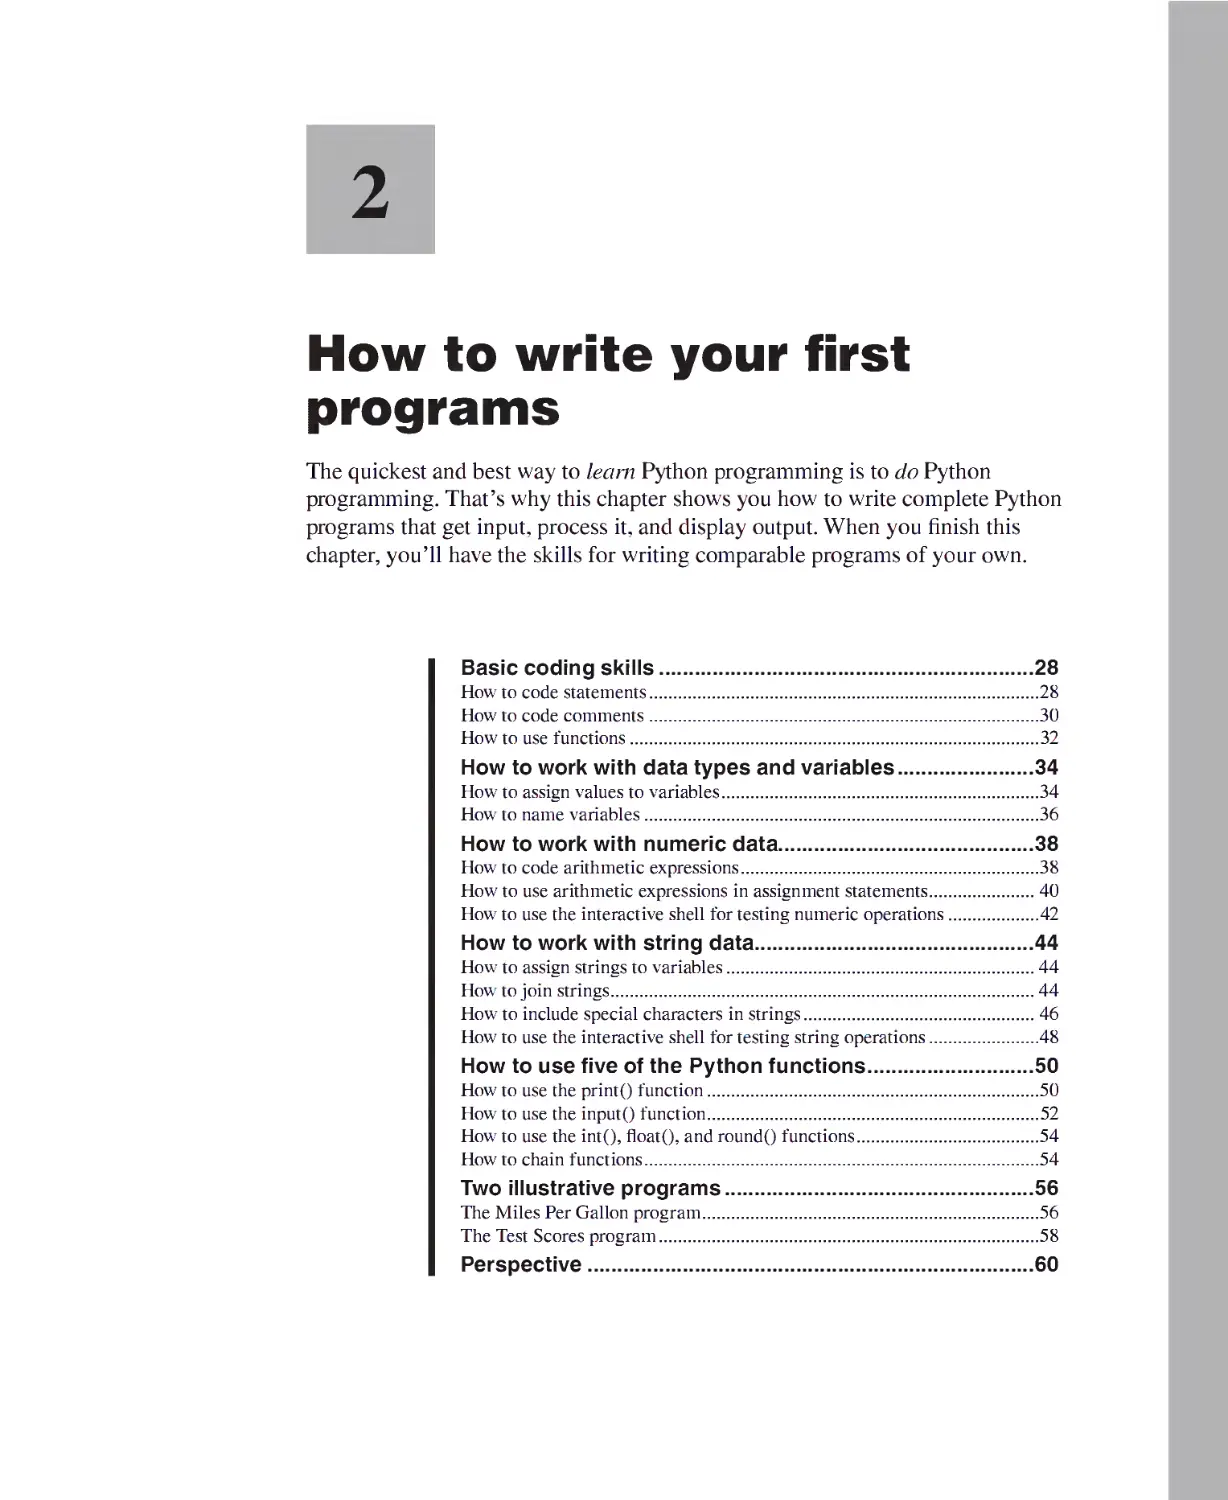 Chapter 2 - How to Write Your First Programs